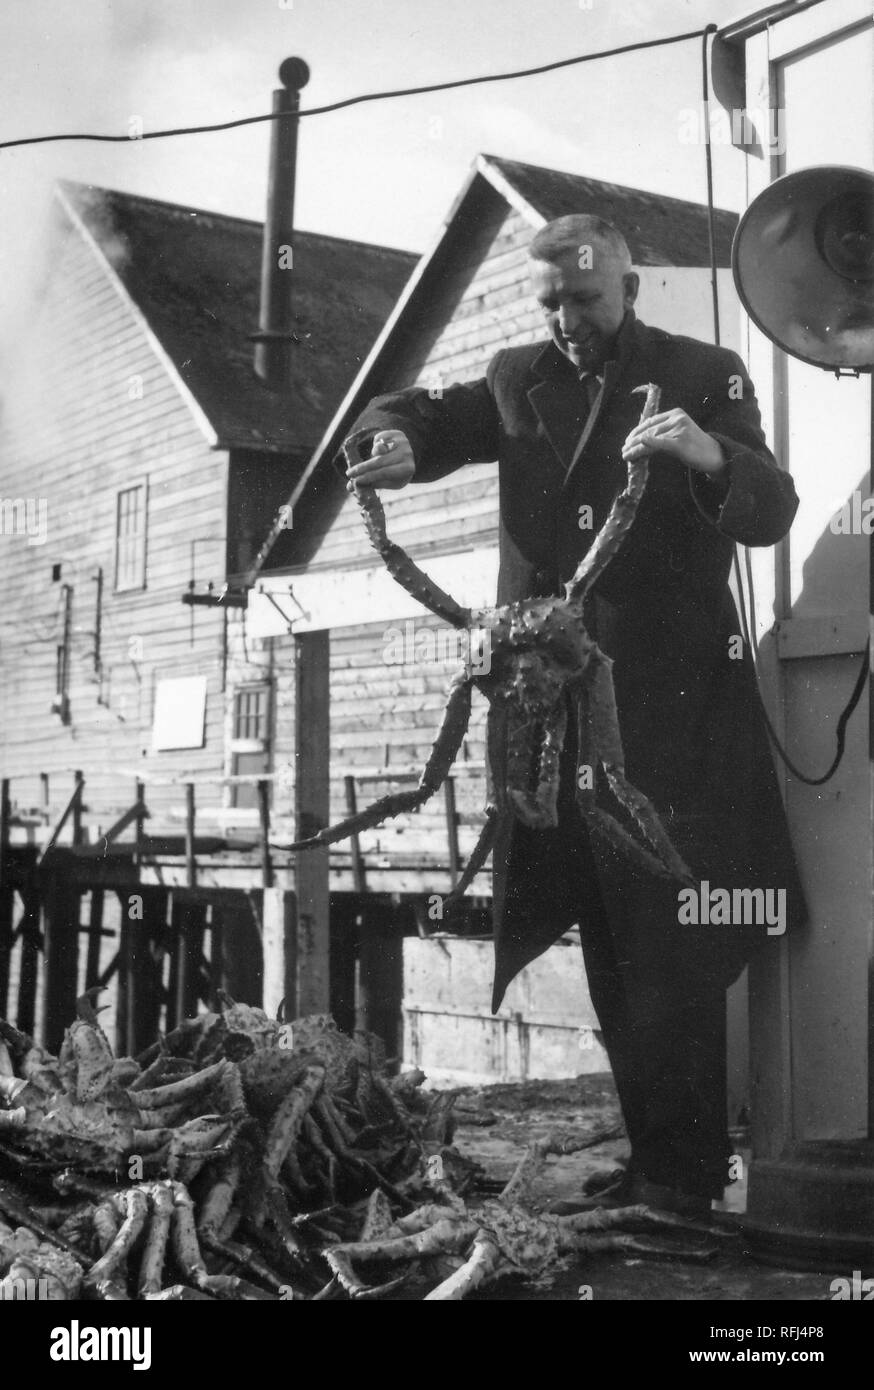 Black and white photograph of a clean-shaven, middle-aged man, seen in full-length view, wearing a coat, and looking downward toward a large, Alaskan, or Red King Crab (Paralithodes camtschaticus) which he holds in front of him by two legs, with the bodies of several more King crabs visible in the foreground and a wooden structure built above a pier visible in the background, photographed during a hunting and fishing trip located in Alaska, 1955. () Stock Photo